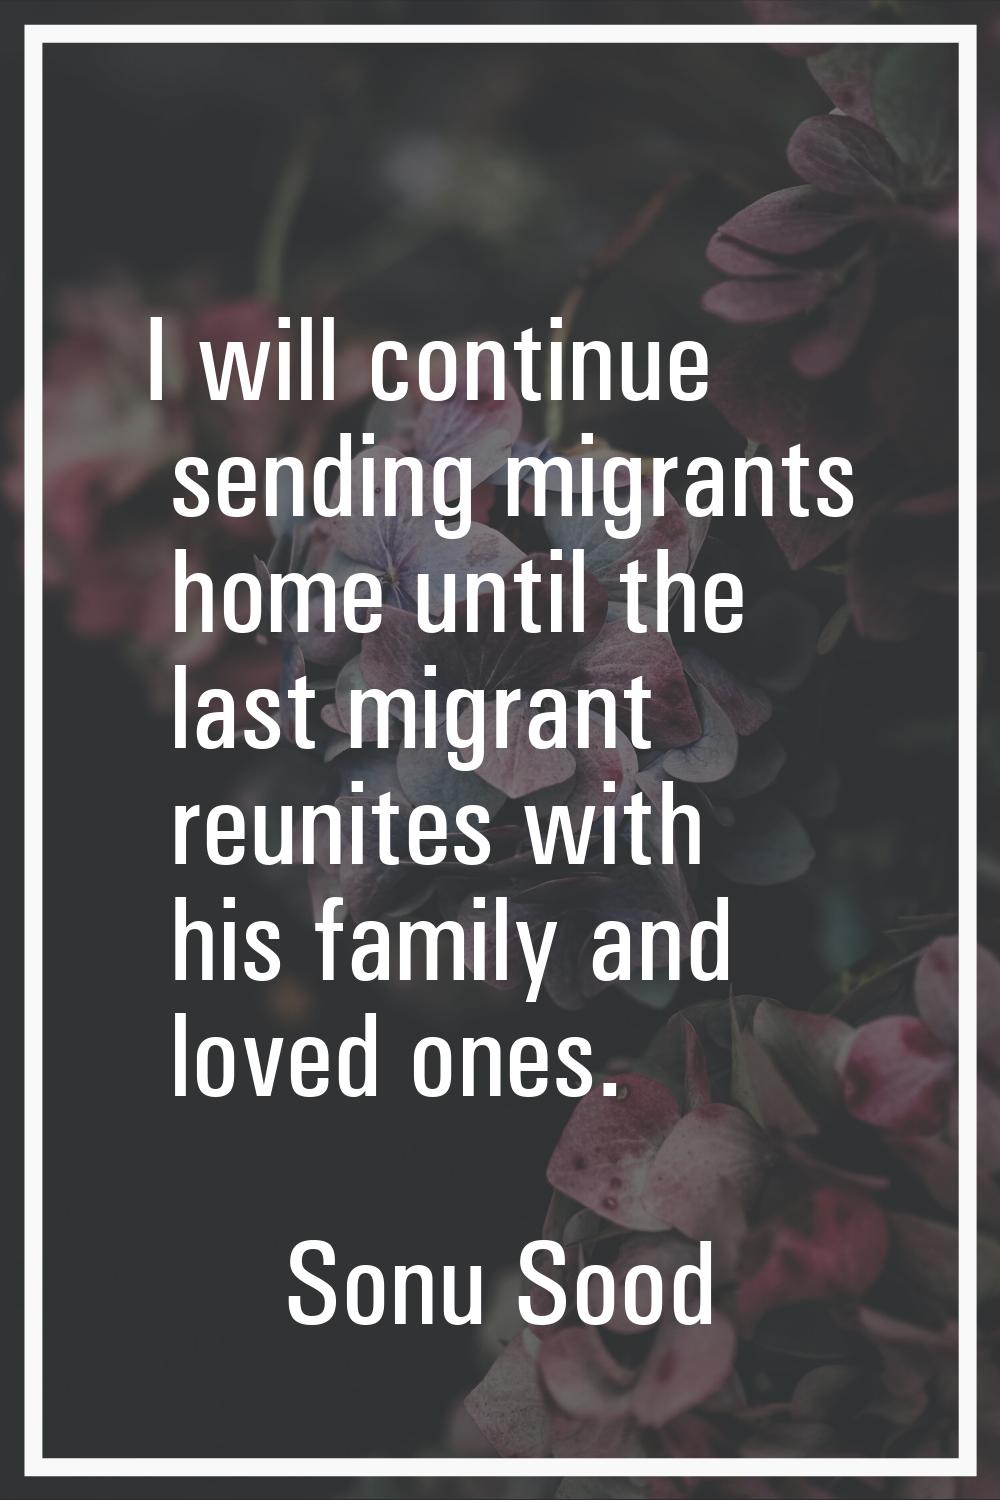 I will continue sending migrants home until the last migrant reunites with his family and loved one